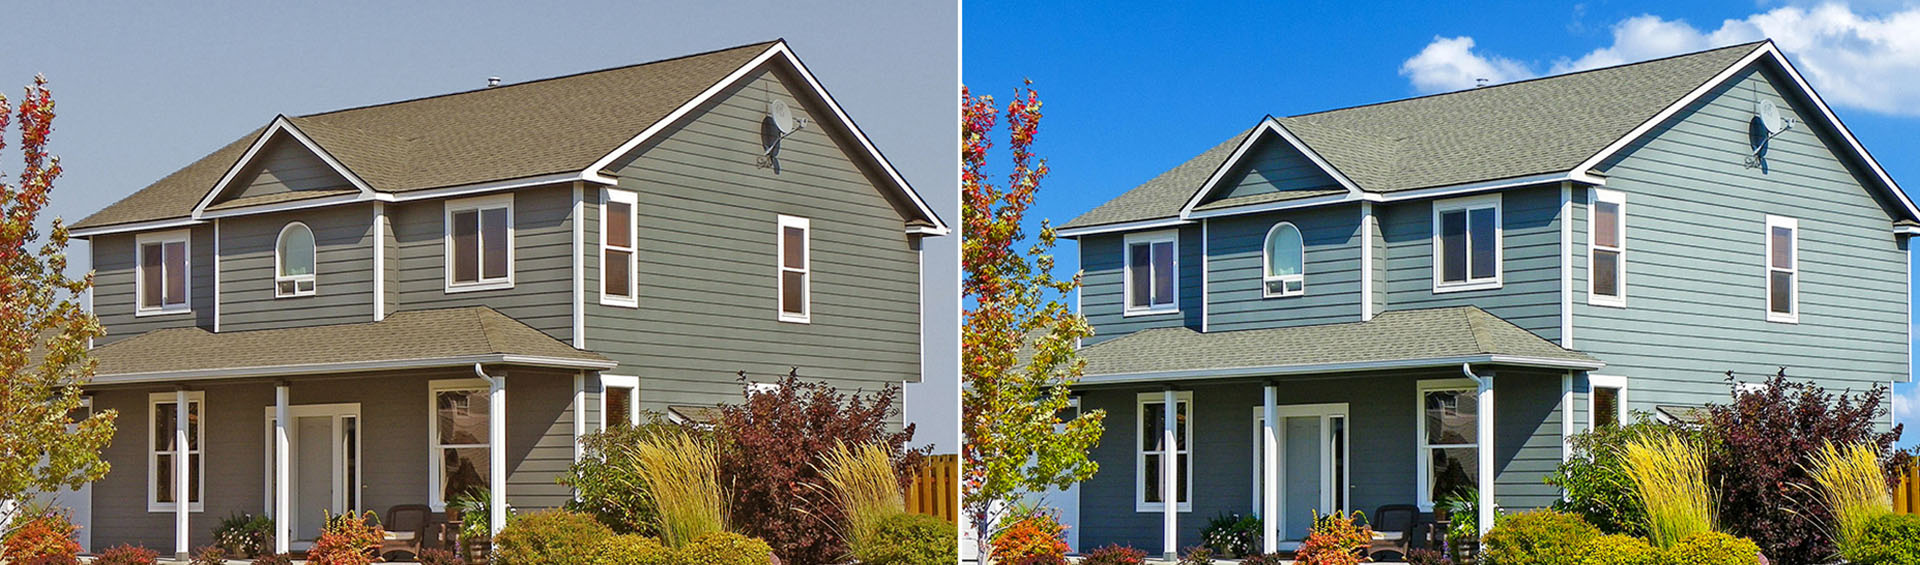 Real Estate Sky Replacement and Color Correction Services